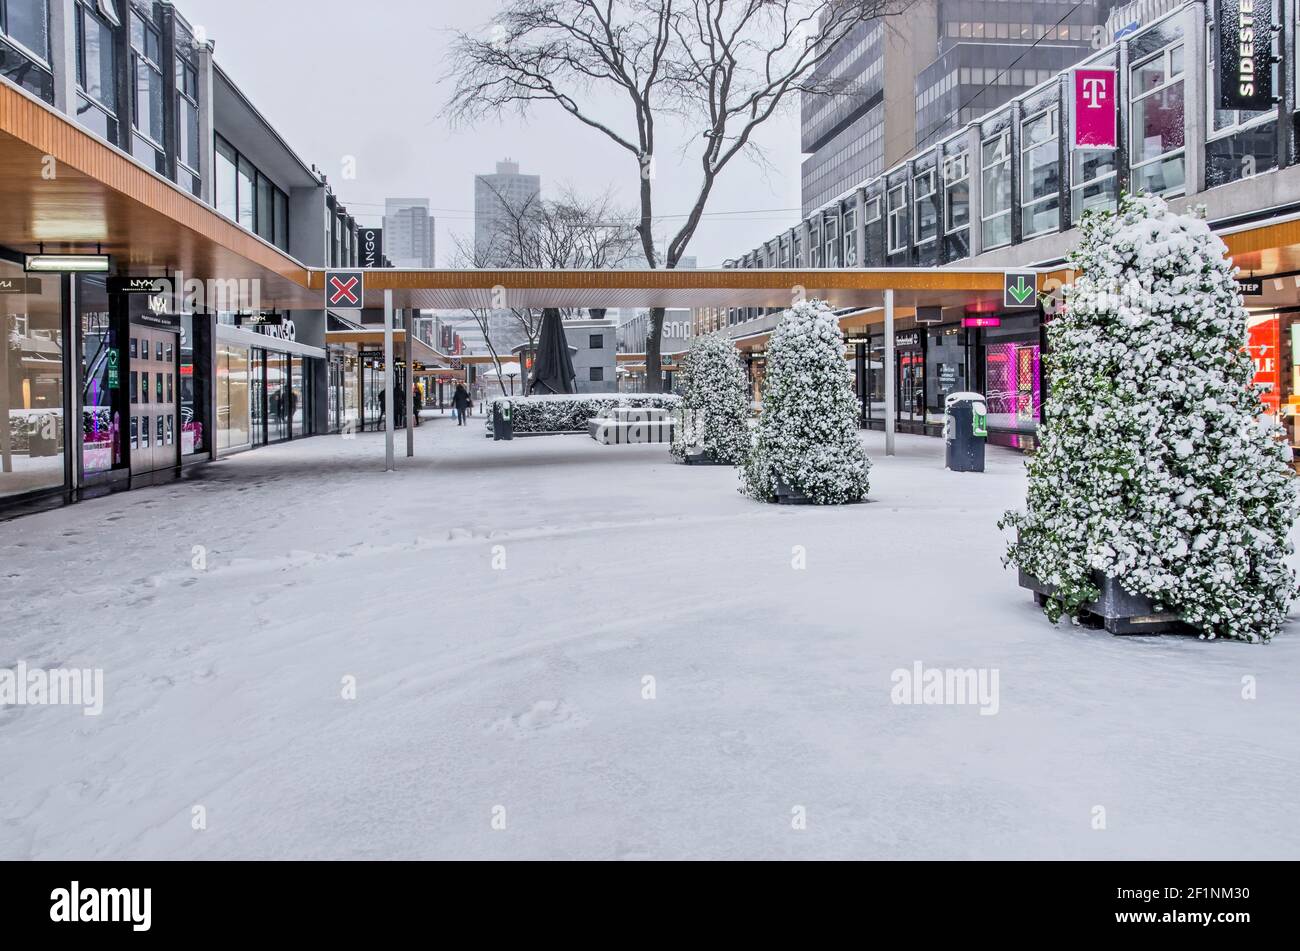 Rotterdam, The Netherlands, February 7, 2021: Lijnbaan pedestrian shopping street, almost deserted and snow-covered, on a cold winter day Stock Photo